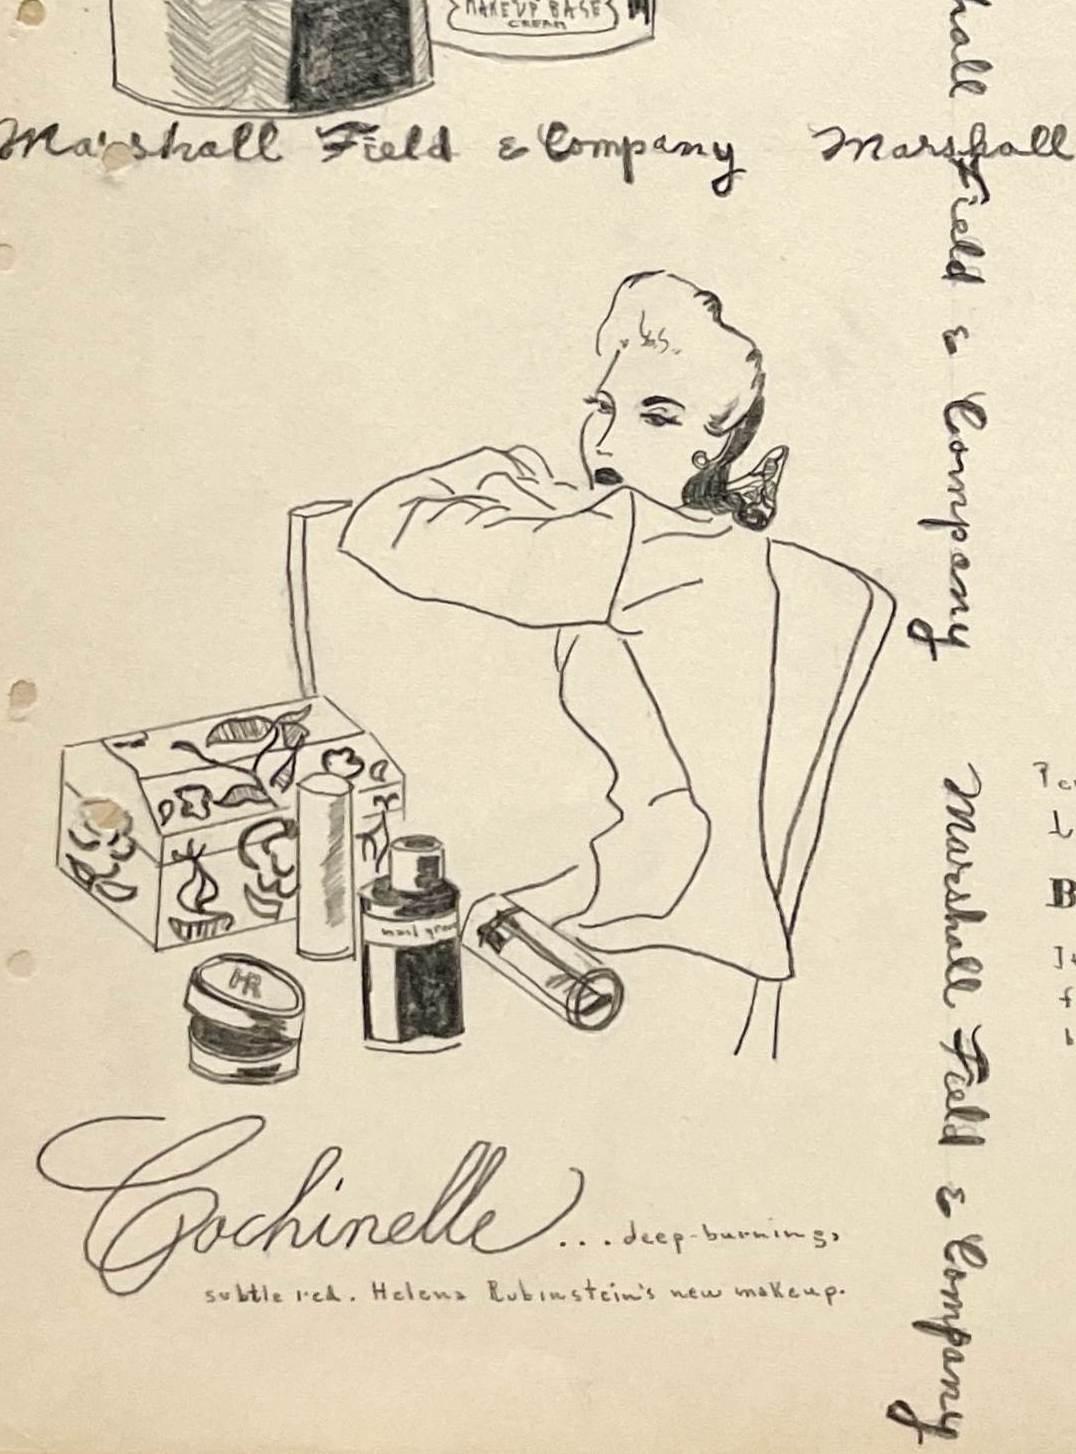 An early 1940s fashion study featuring and advertisement for Marshall Field & Company featuring cosmetic & perfume.  Provenance: Cornelia Steckl-Jurin, Founder of the Fashion Department at the School of the Art Institute of Chicago. Archivally